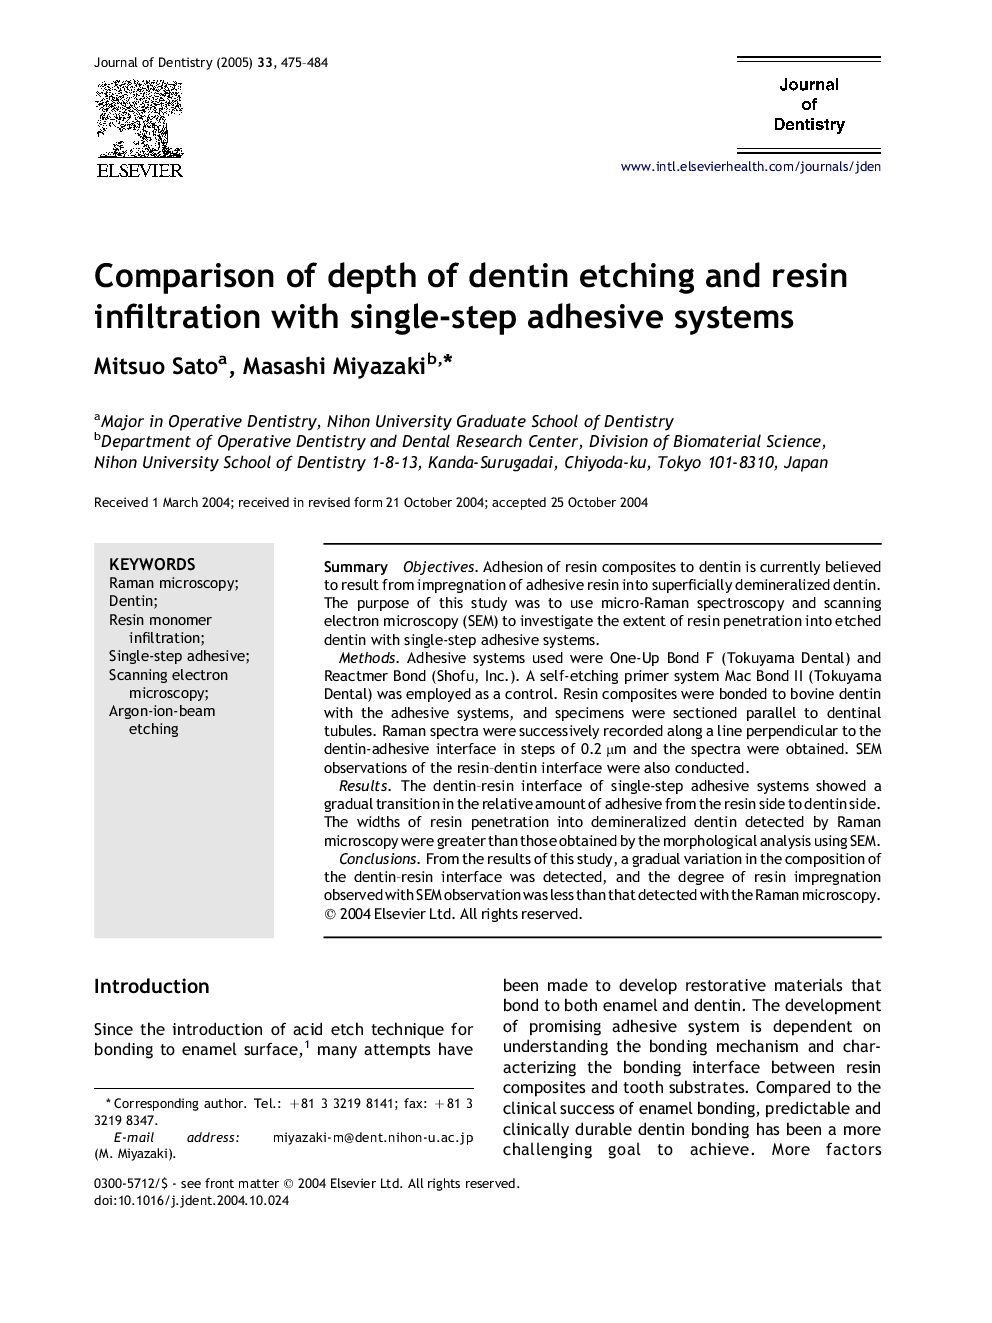 Comparison of depth of dentin etching and resin infiltration with single-step adhesive systems